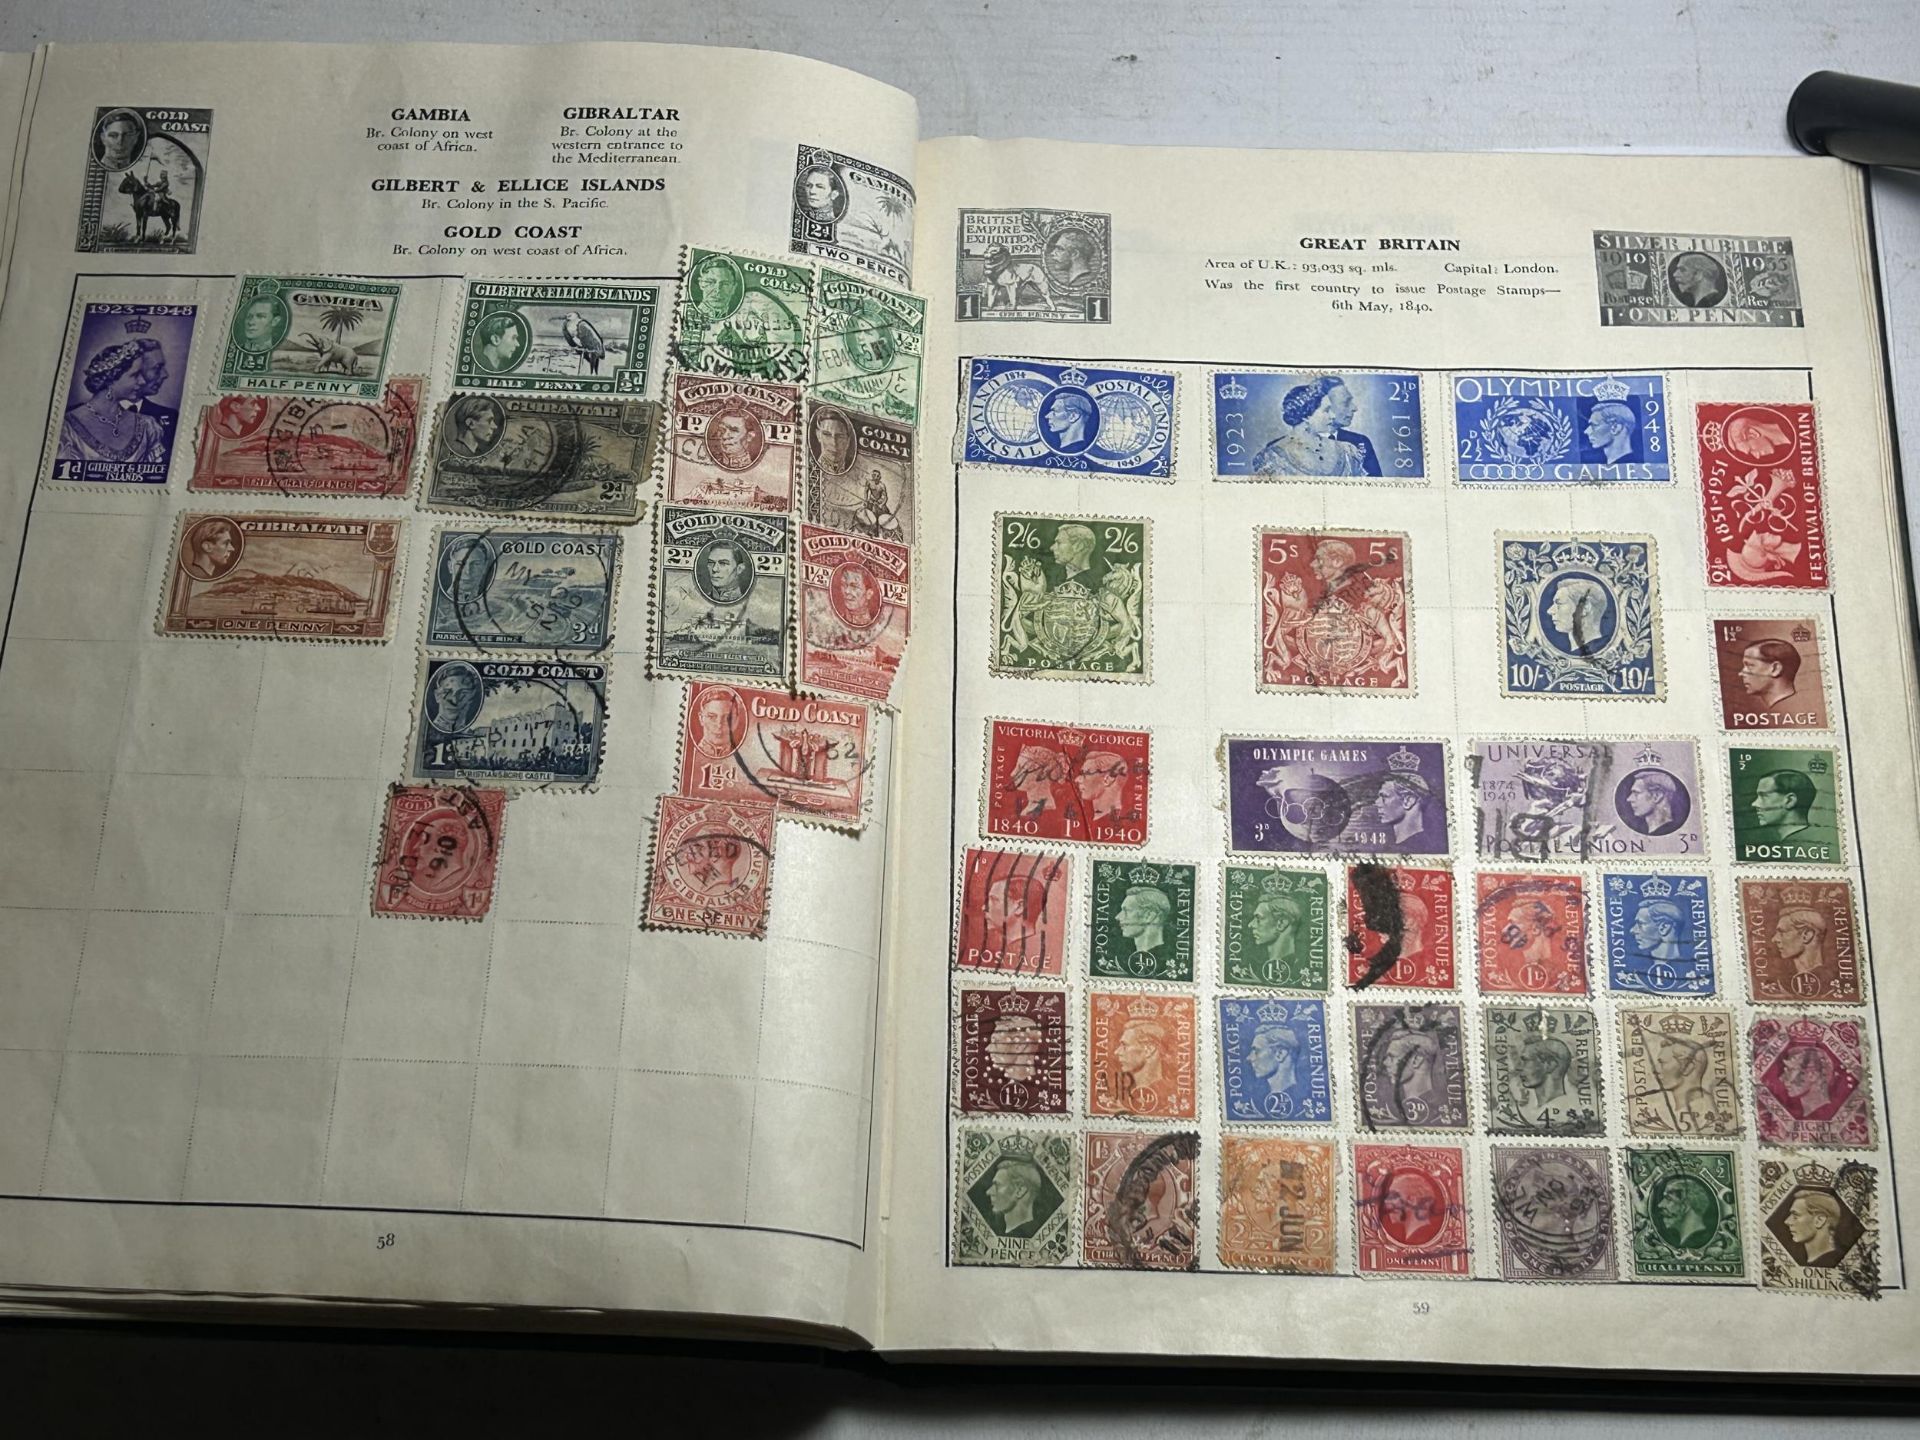 A CAVALIER STAMP ALBUM CONTAINING A COLLECTION OF VARIOUS WORLD STAMPS - Image 3 of 4